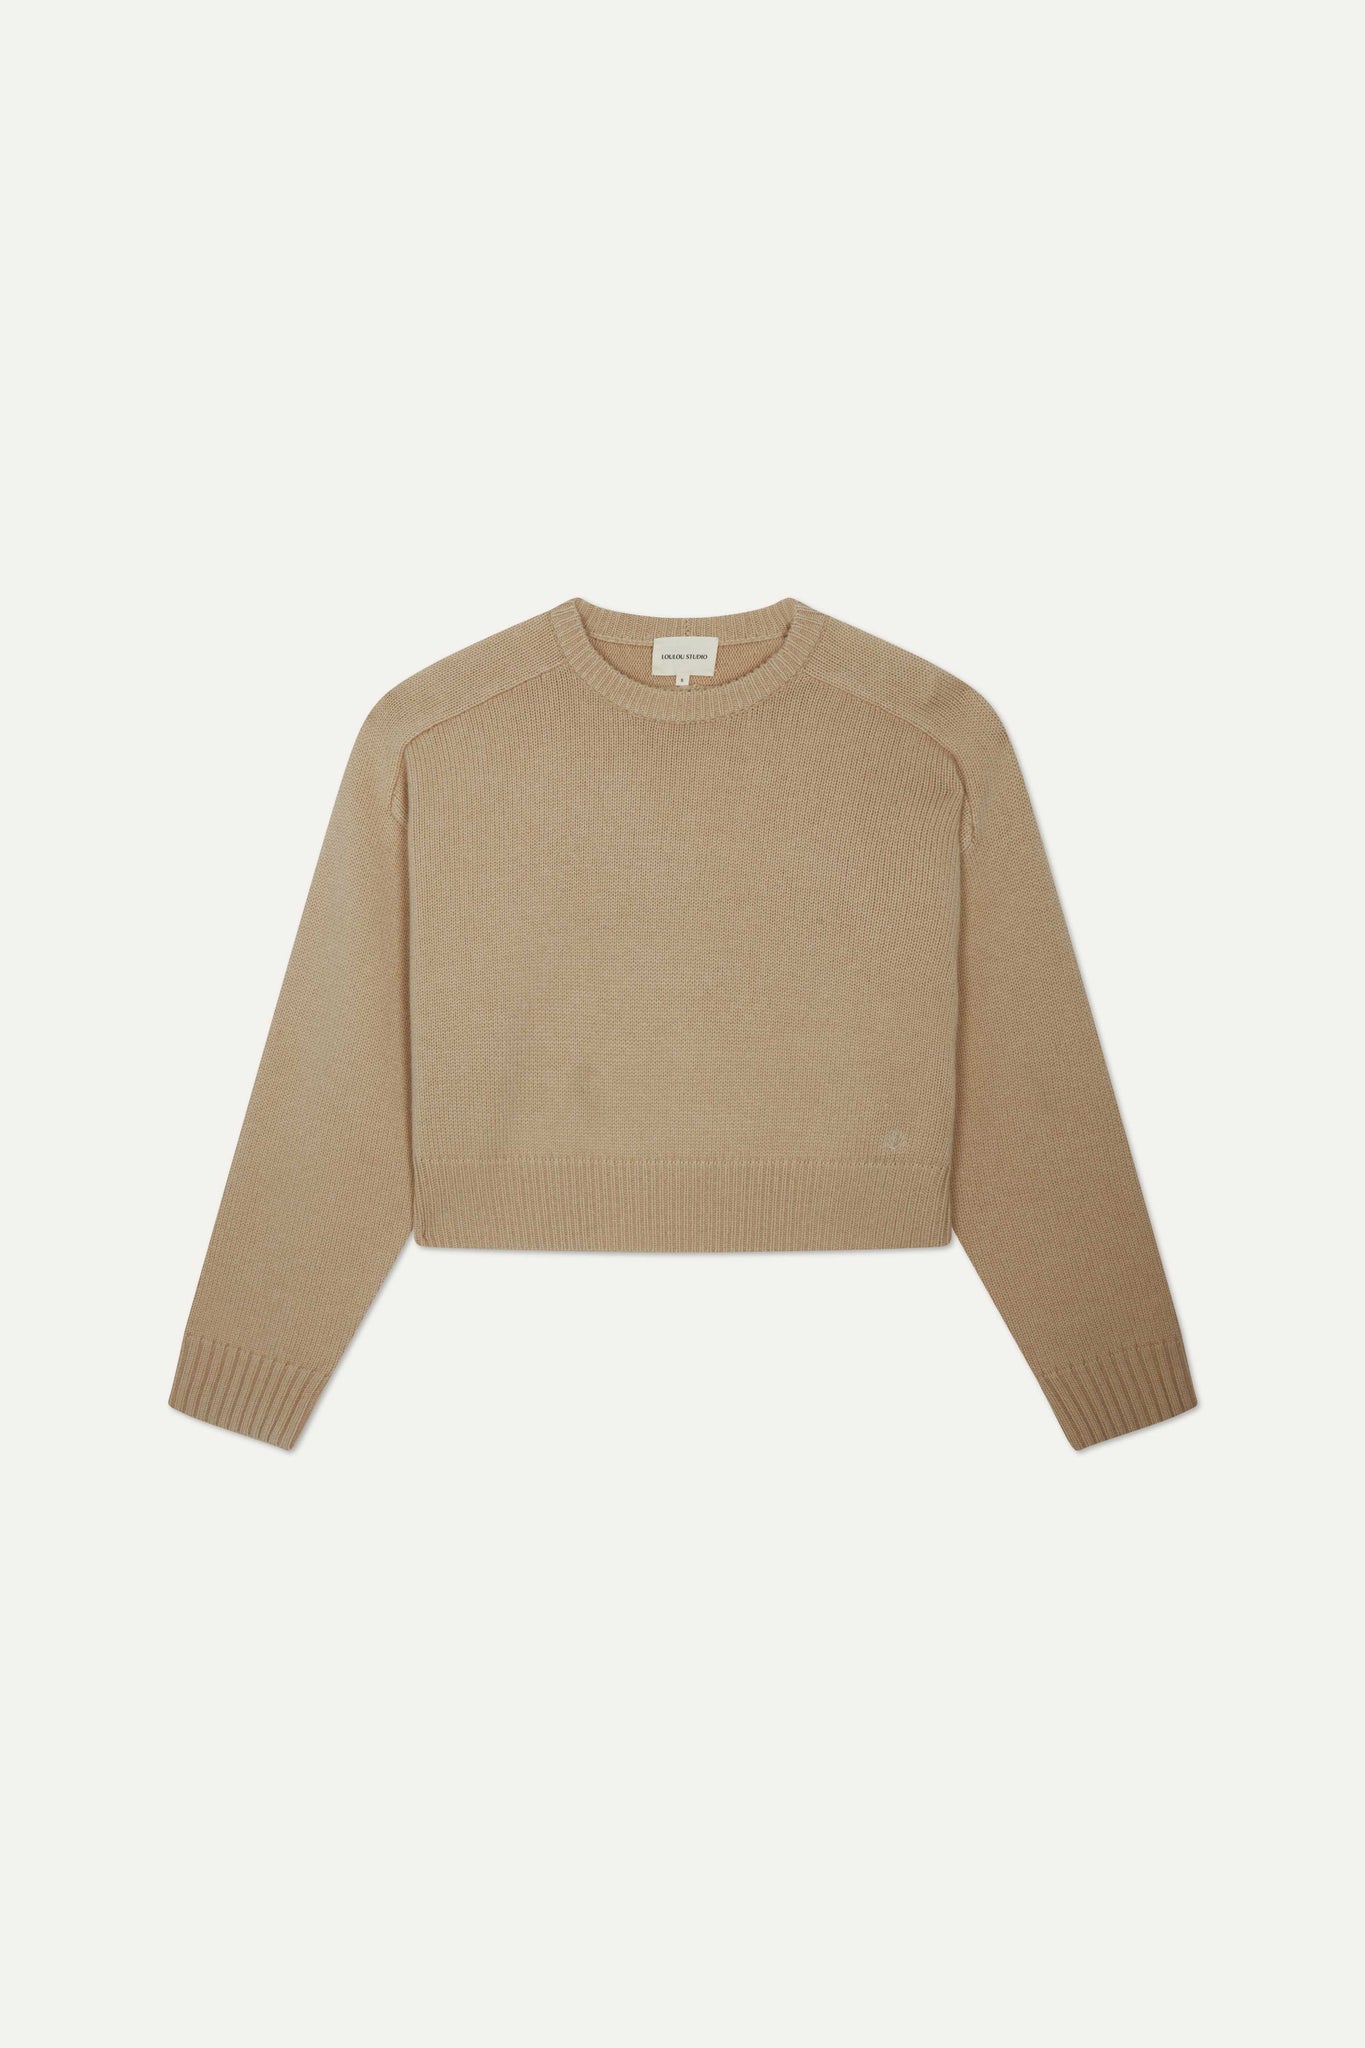 CASHMERE WOOL CROPPED SWEATER BY LOULOU STUDIO IN BEIGE